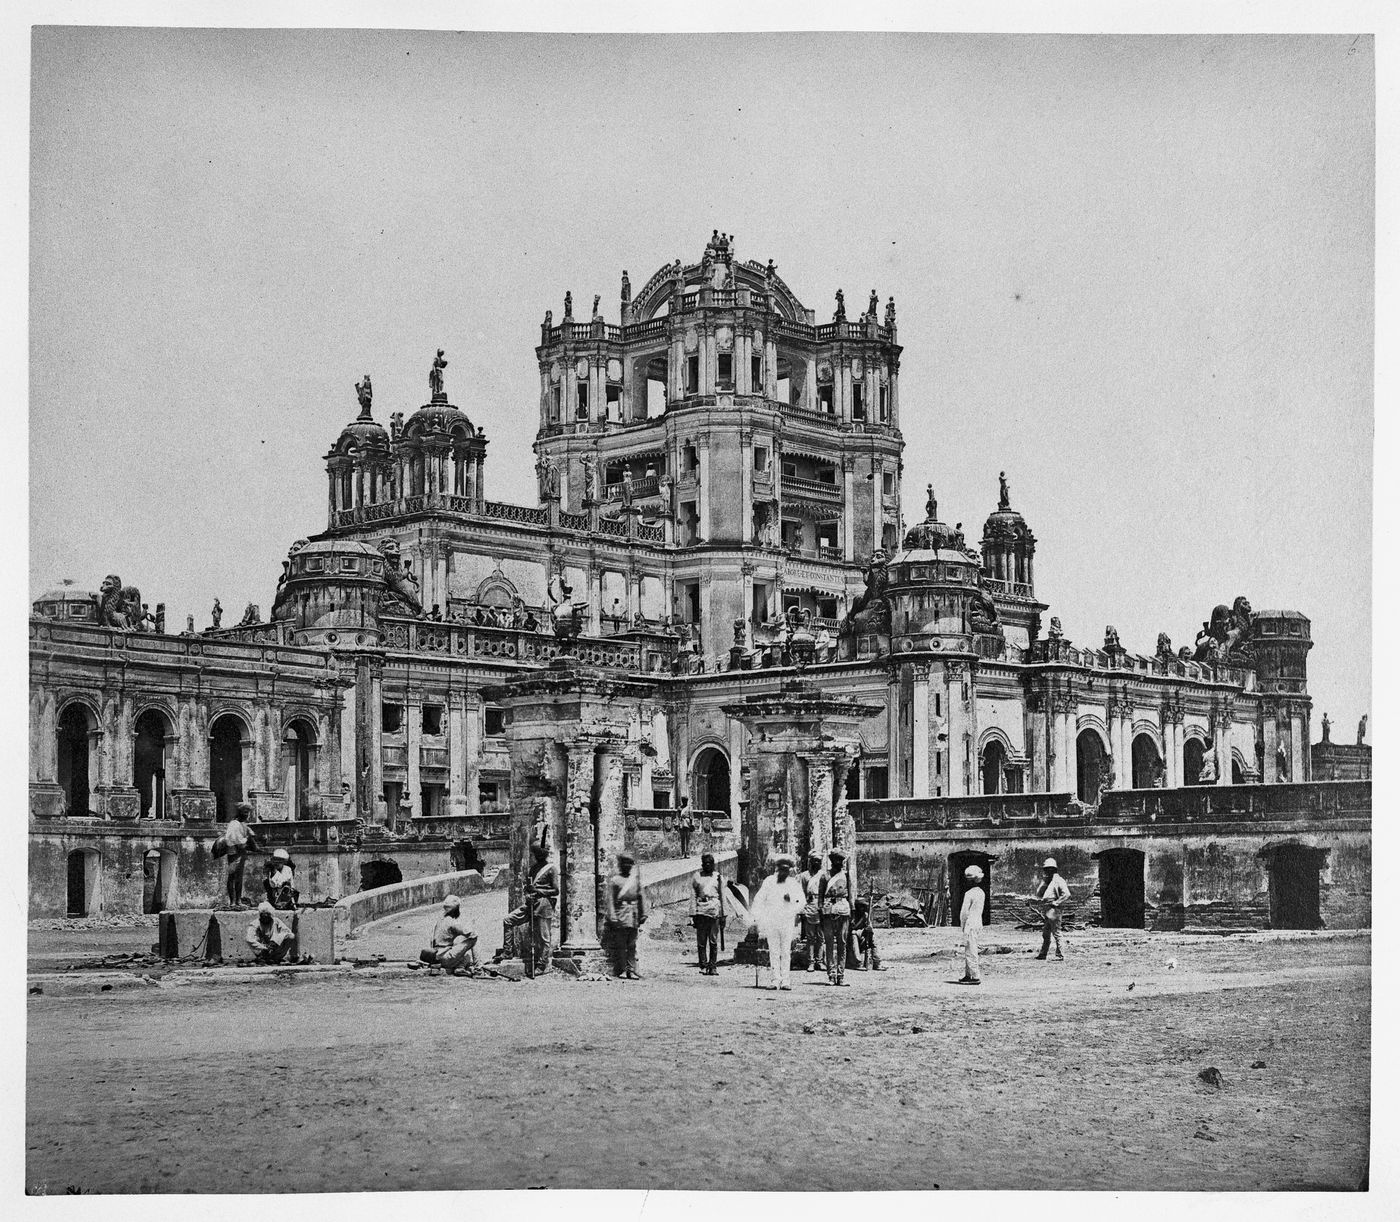 View of Constantia, the main building of La Martinière College, with members of the Sikh Regiment of Ferozepur in the foreground, Lucknow, India